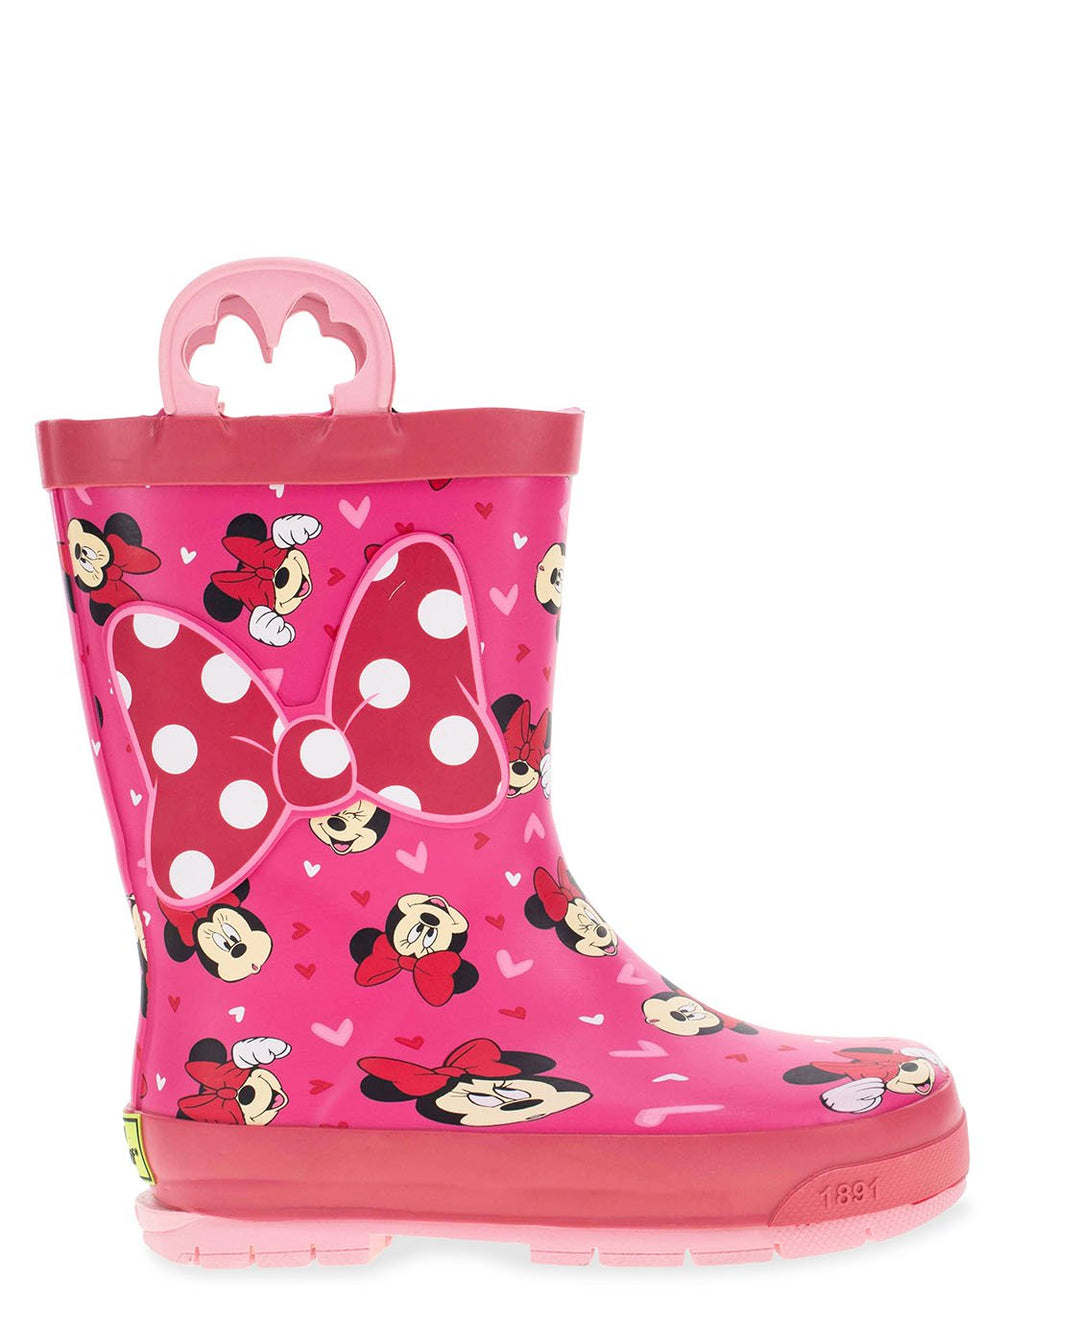 Kids Minnie Mouse Love Rain Boot - Pink - Western Chief